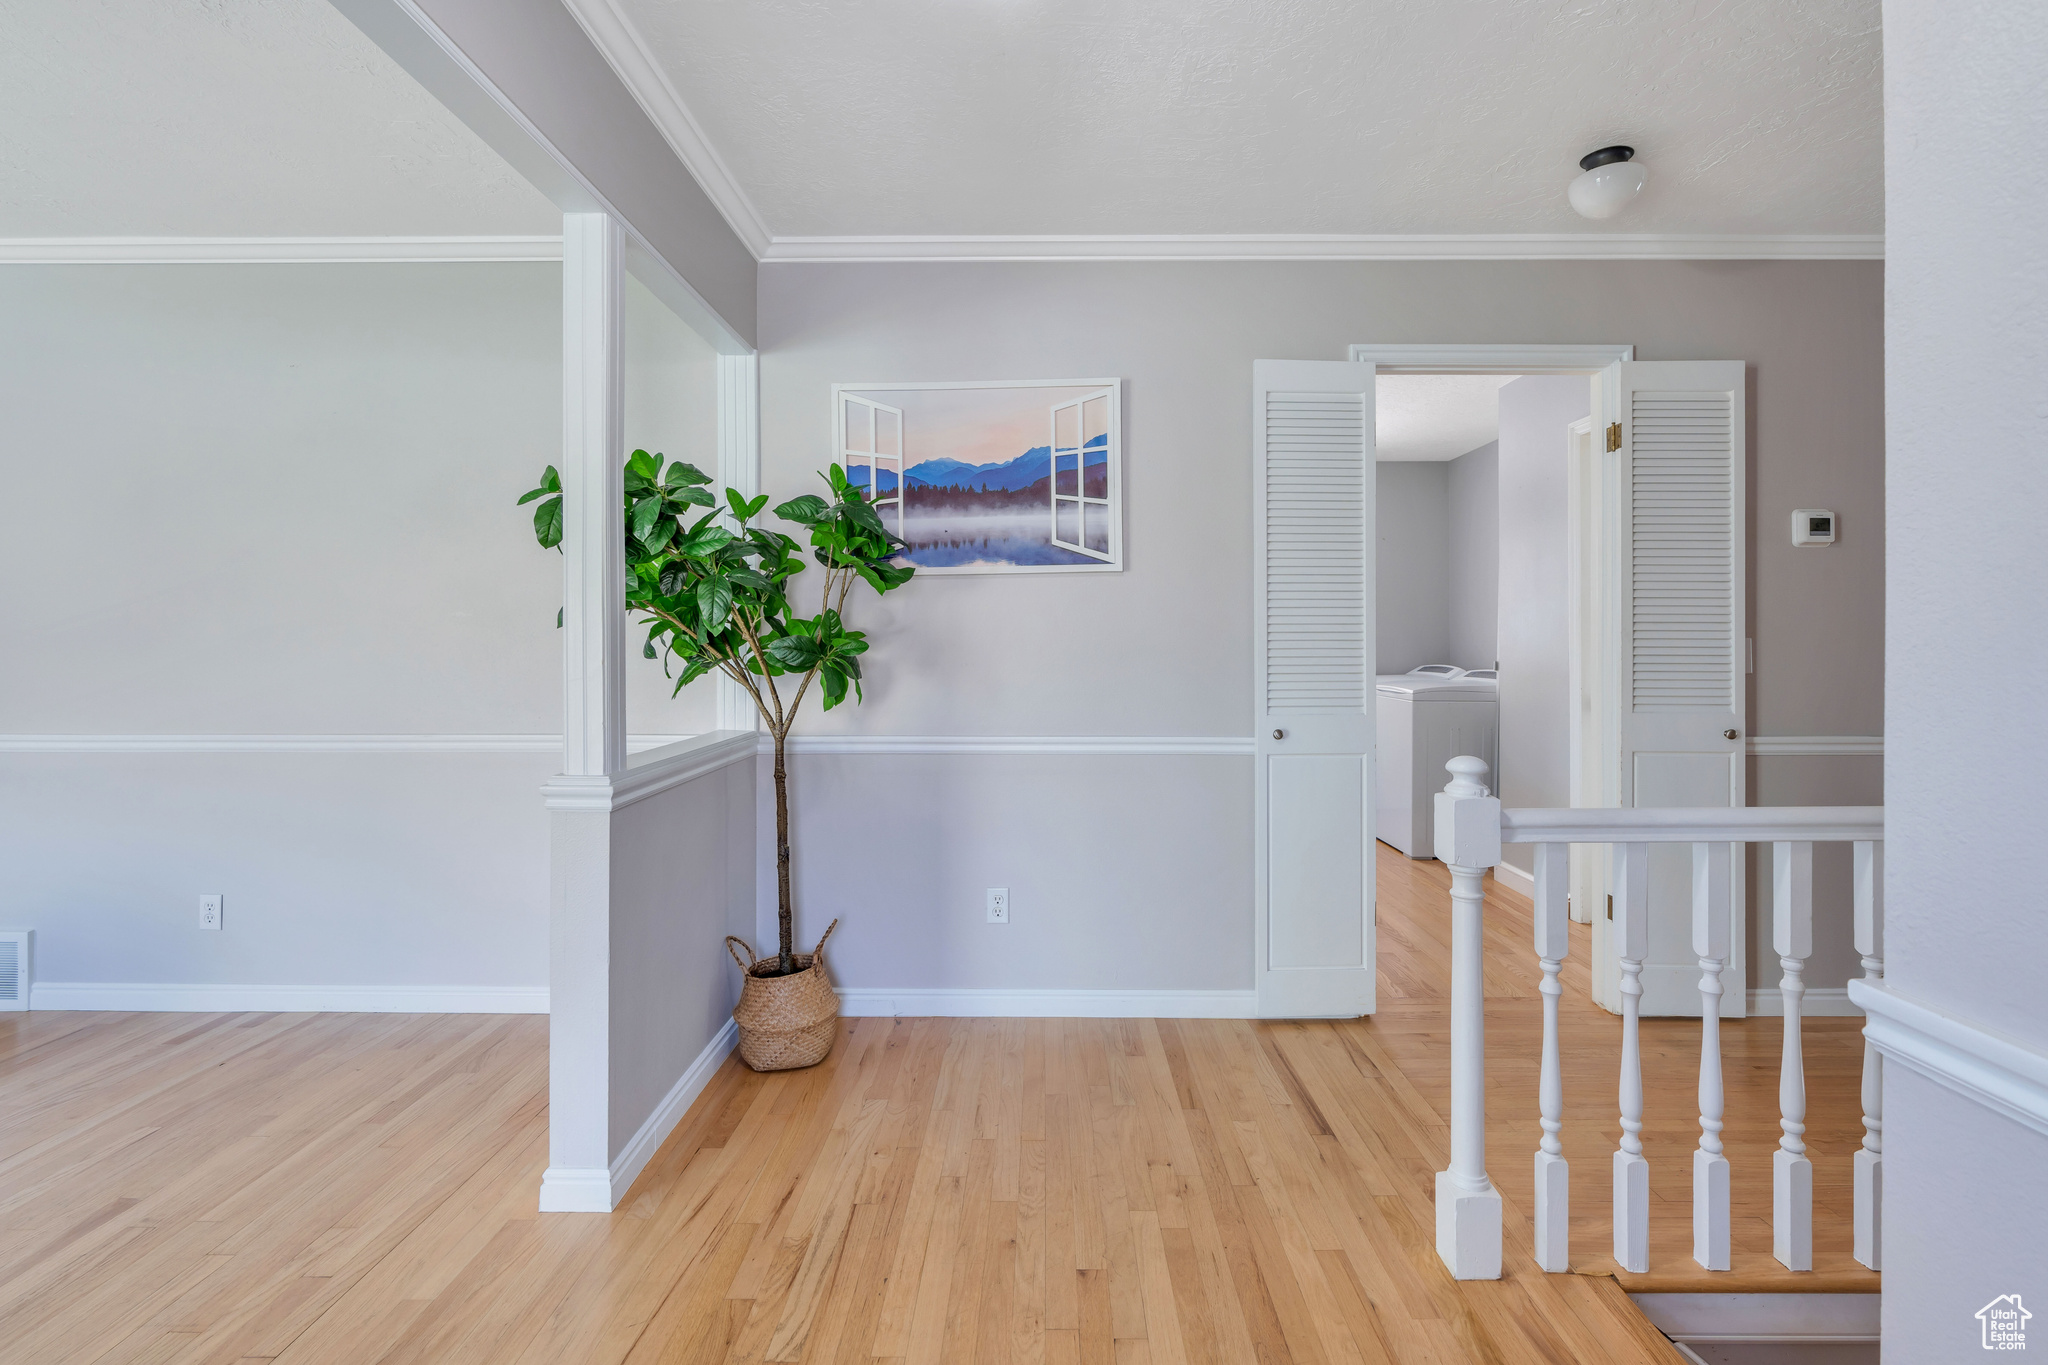 Corridor with light hardwood / wood-style floors, crown molding, and washer / clothes dryer